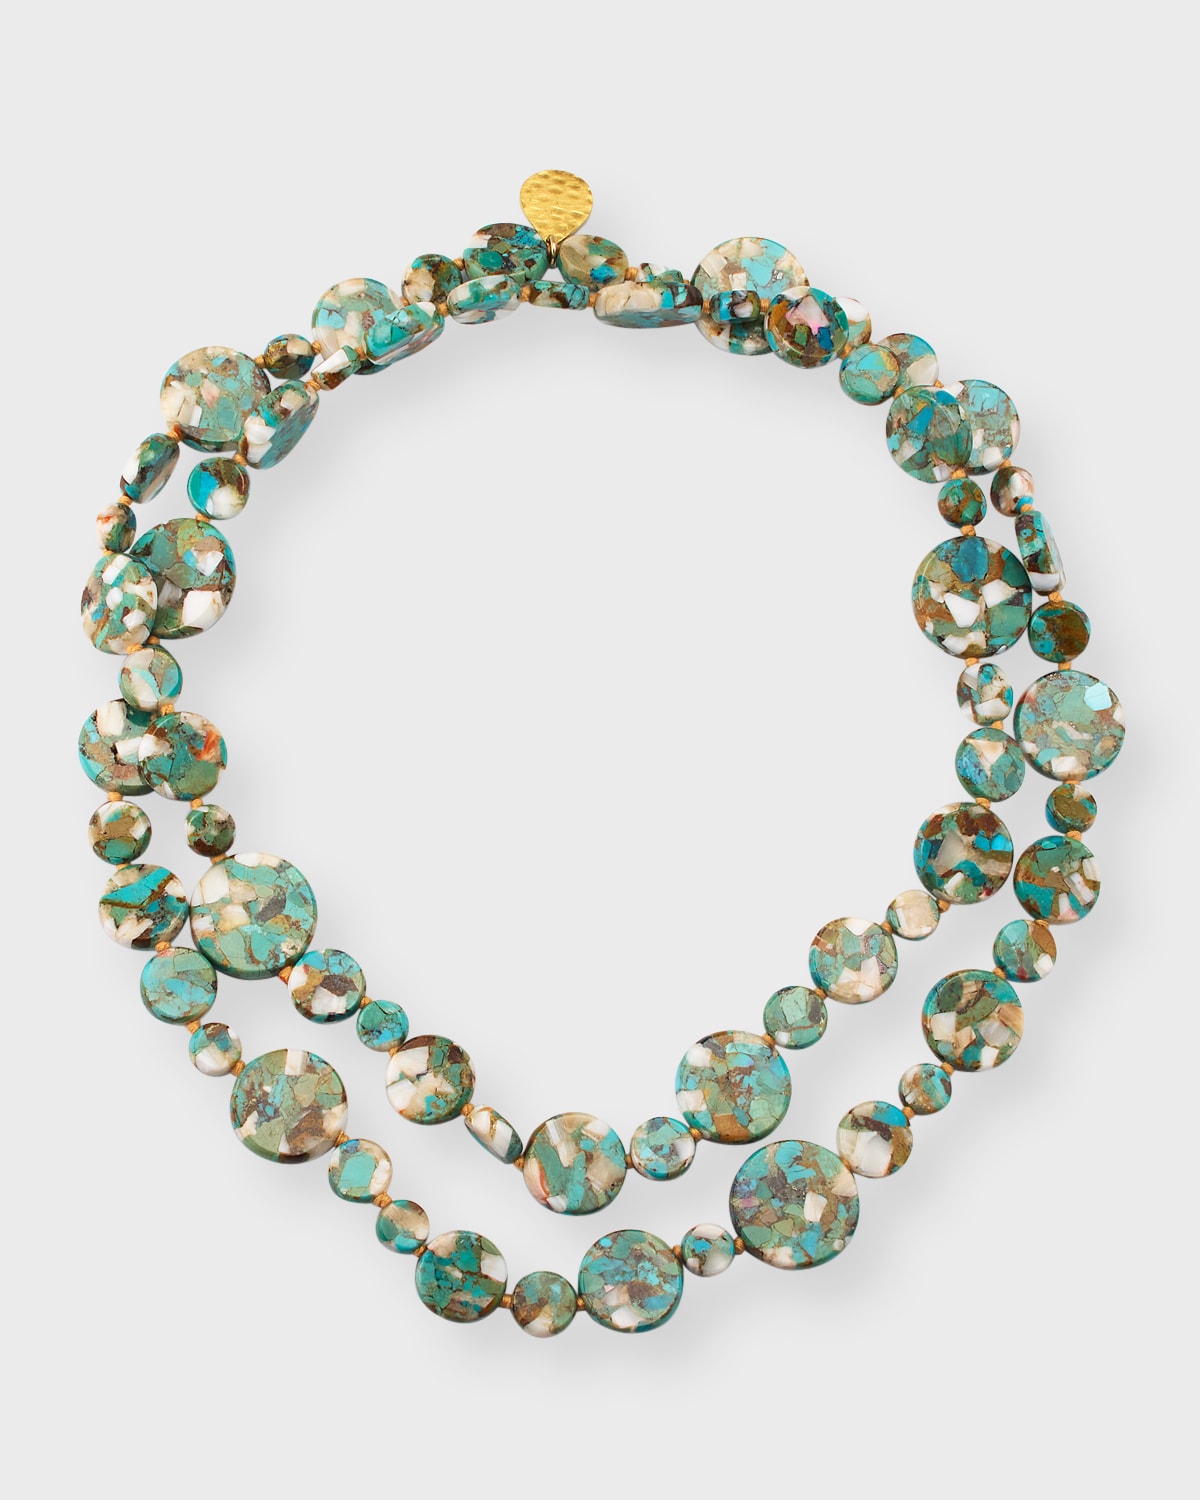 Devon Leigh Long Turquoise And Pearly Coin Necklace, 36"l In Green